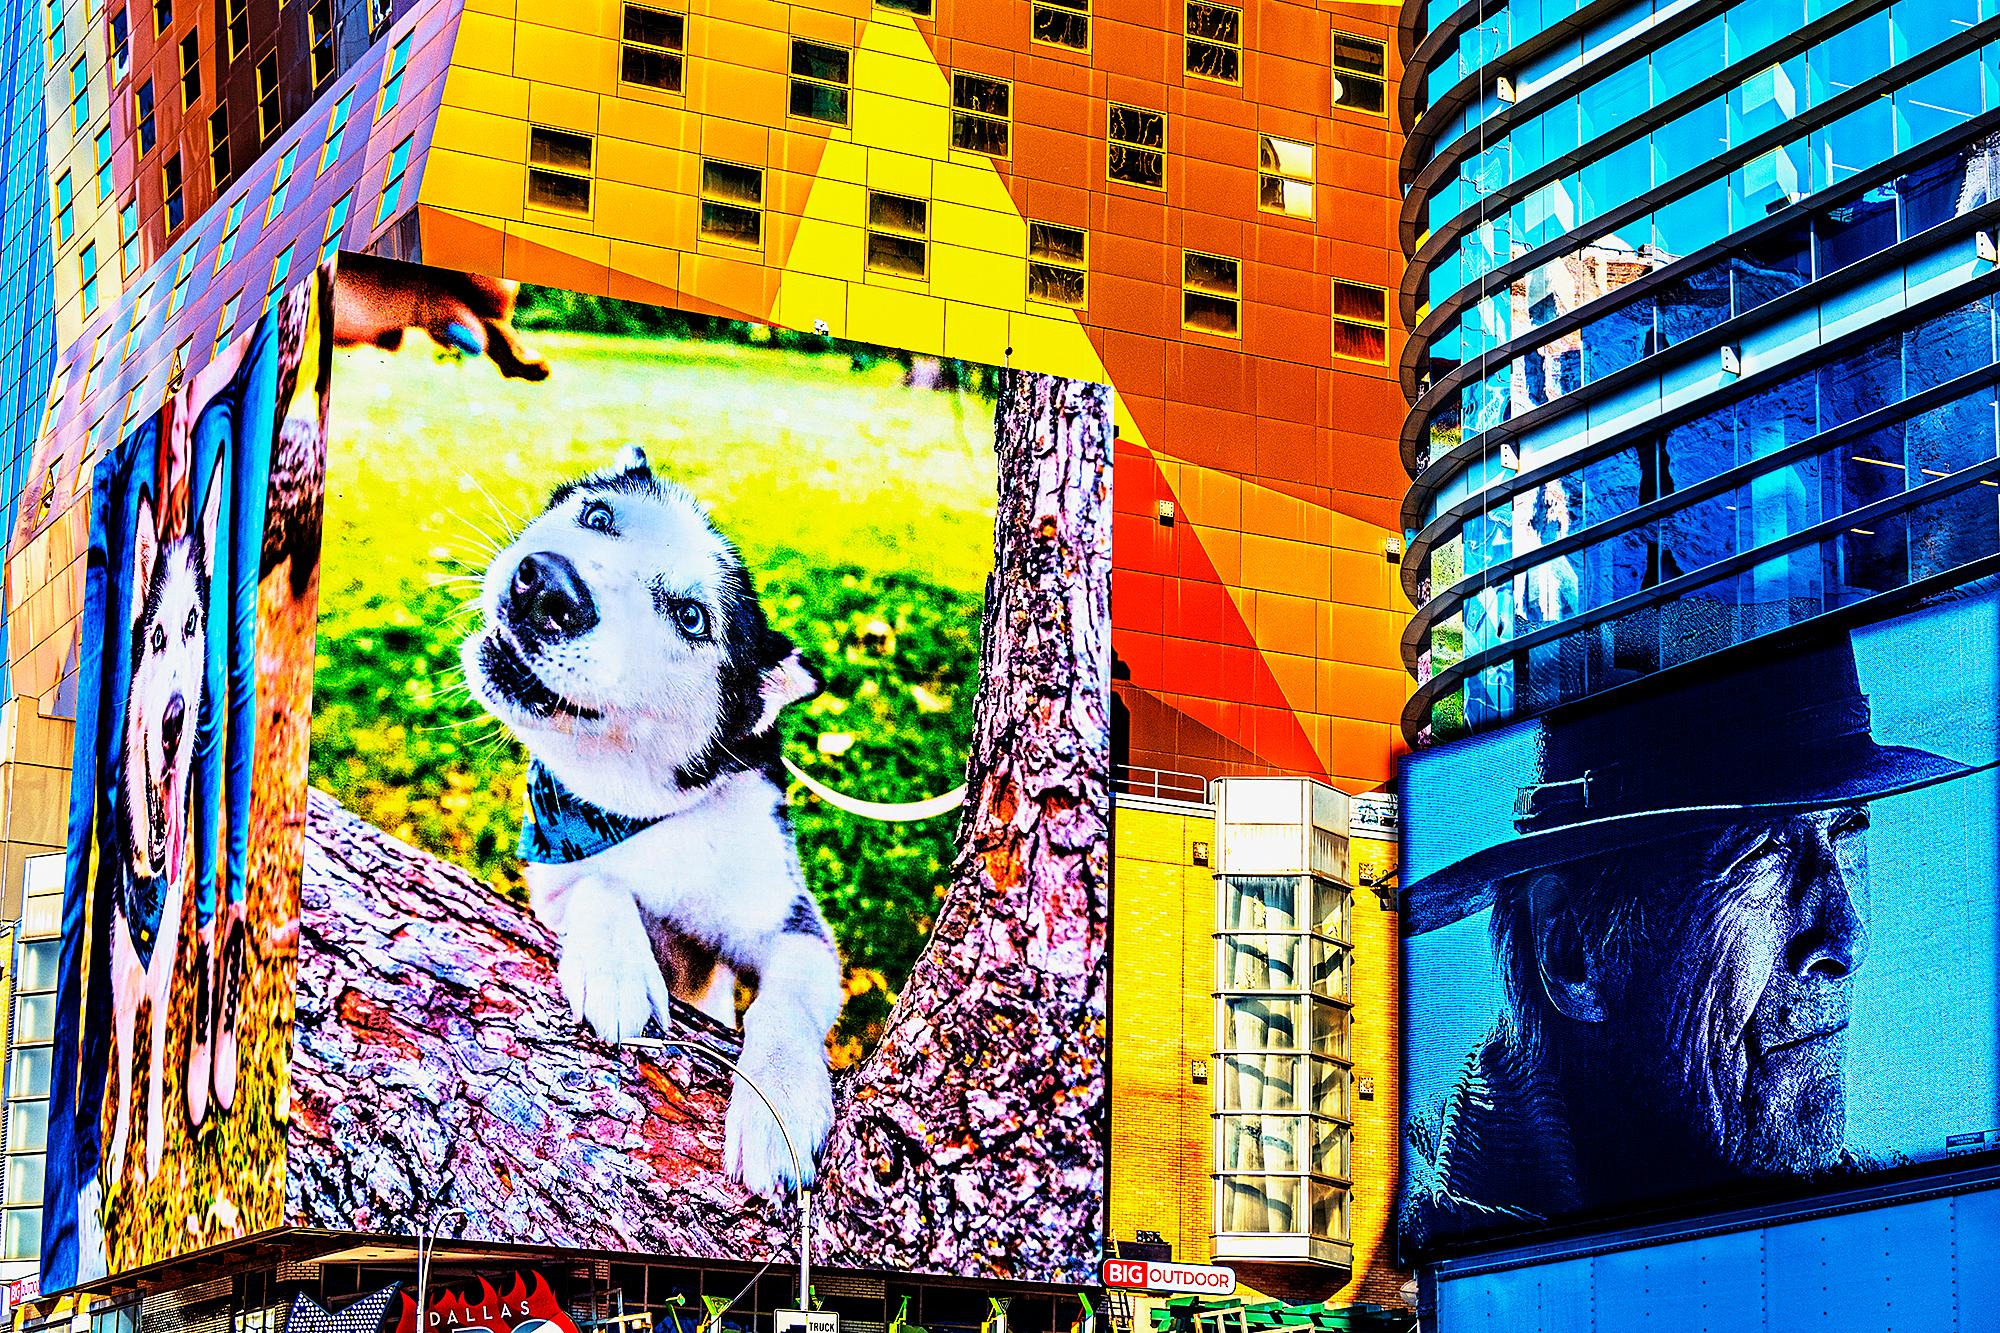 Mitchell Funk Color Photograph – Alle amerikanische Favoriten:  Husky-Hunde und Clint Eastwood am Times Square